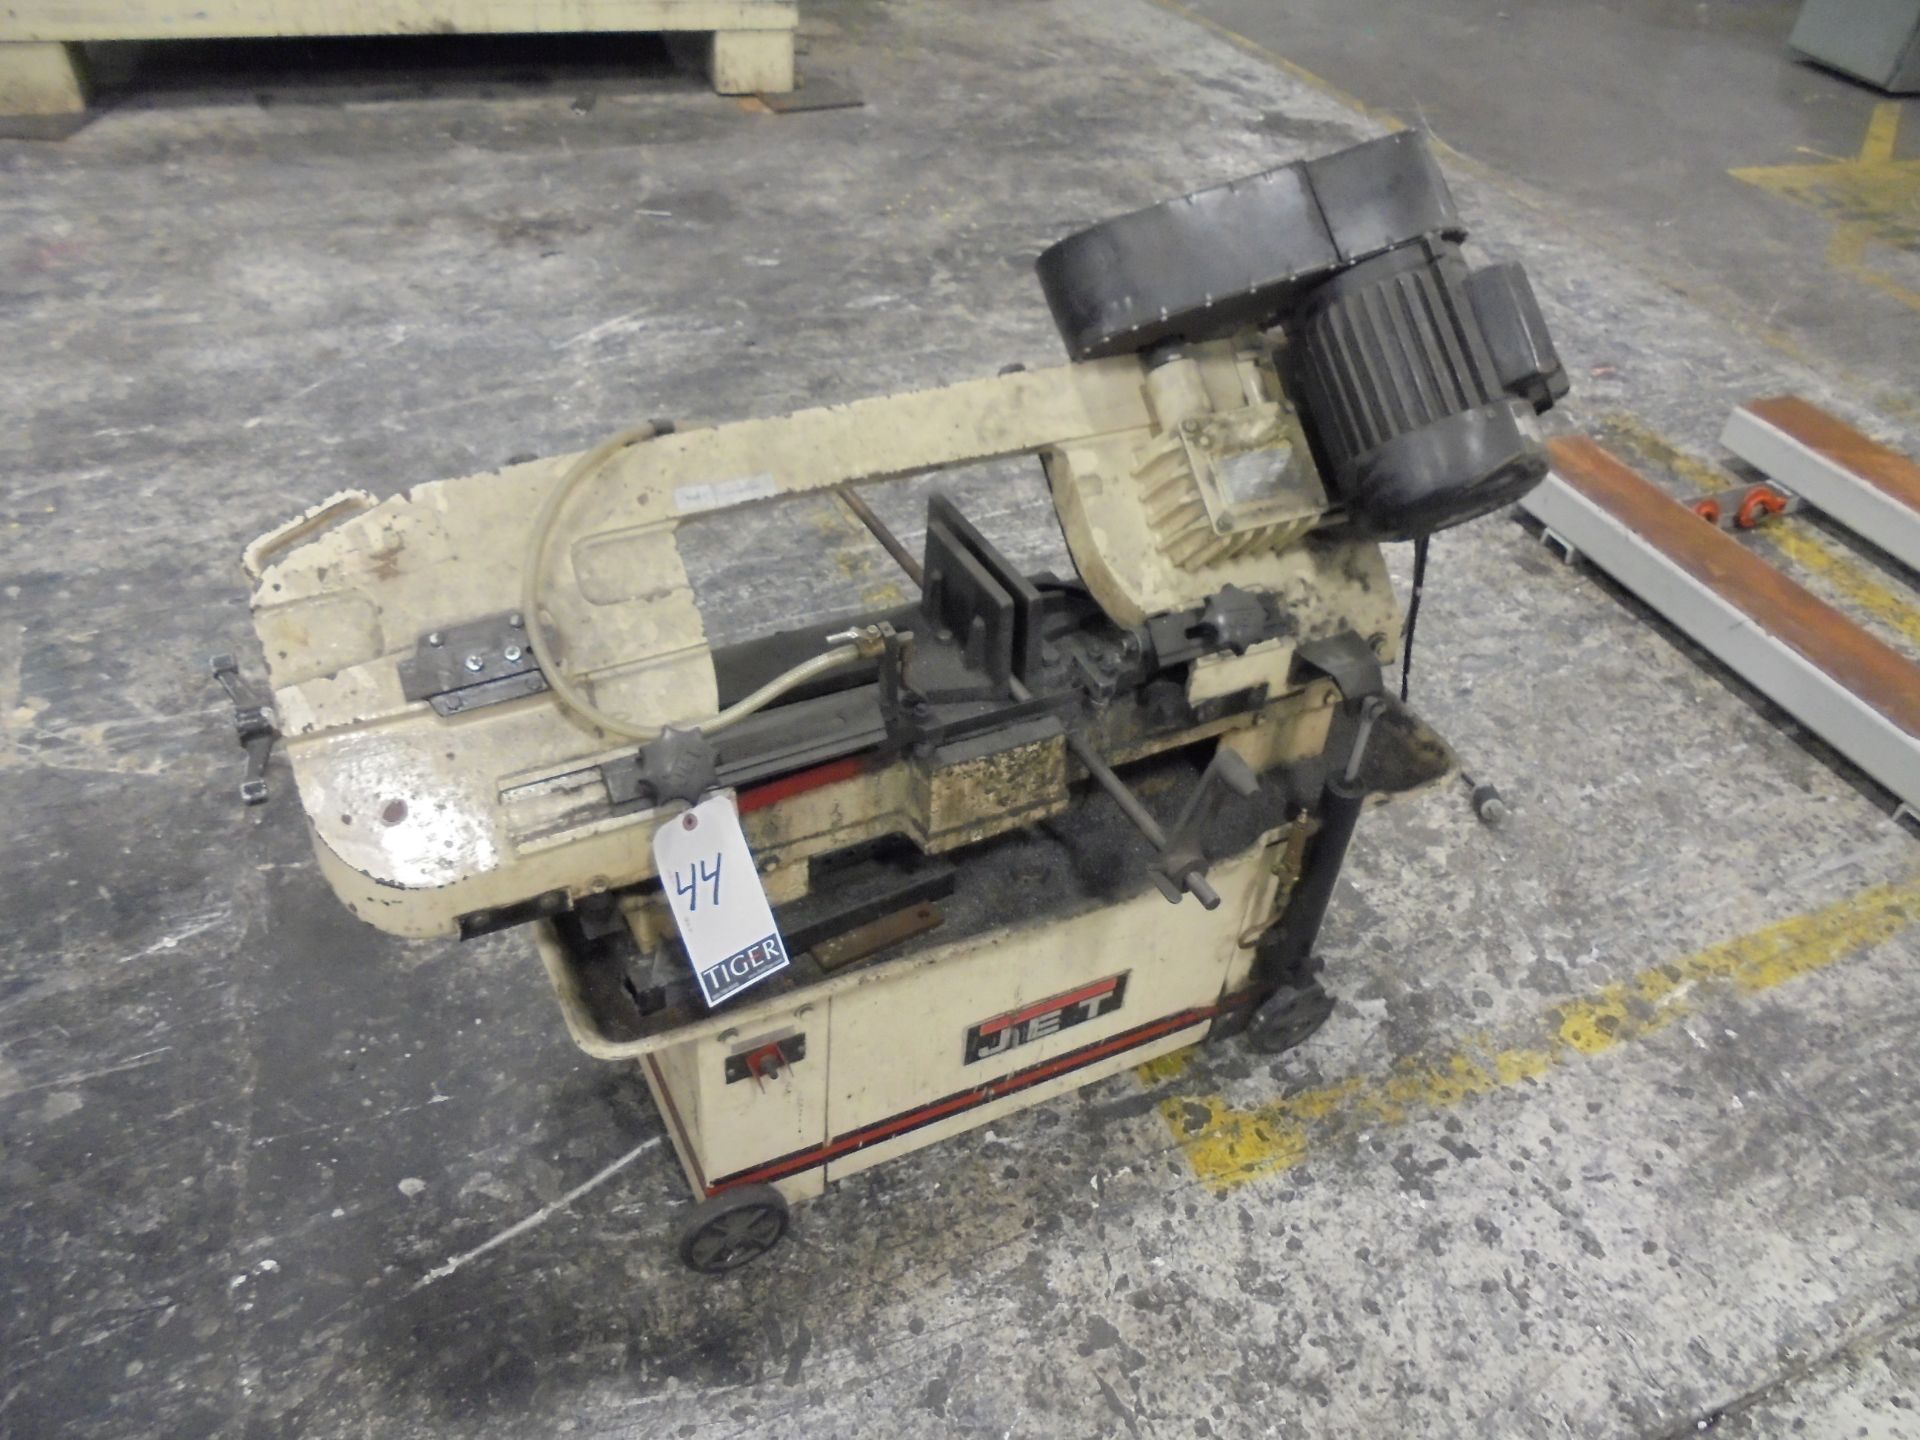 Jet Metal Cutting Bandsaw - Site Location: Bluffton, IN